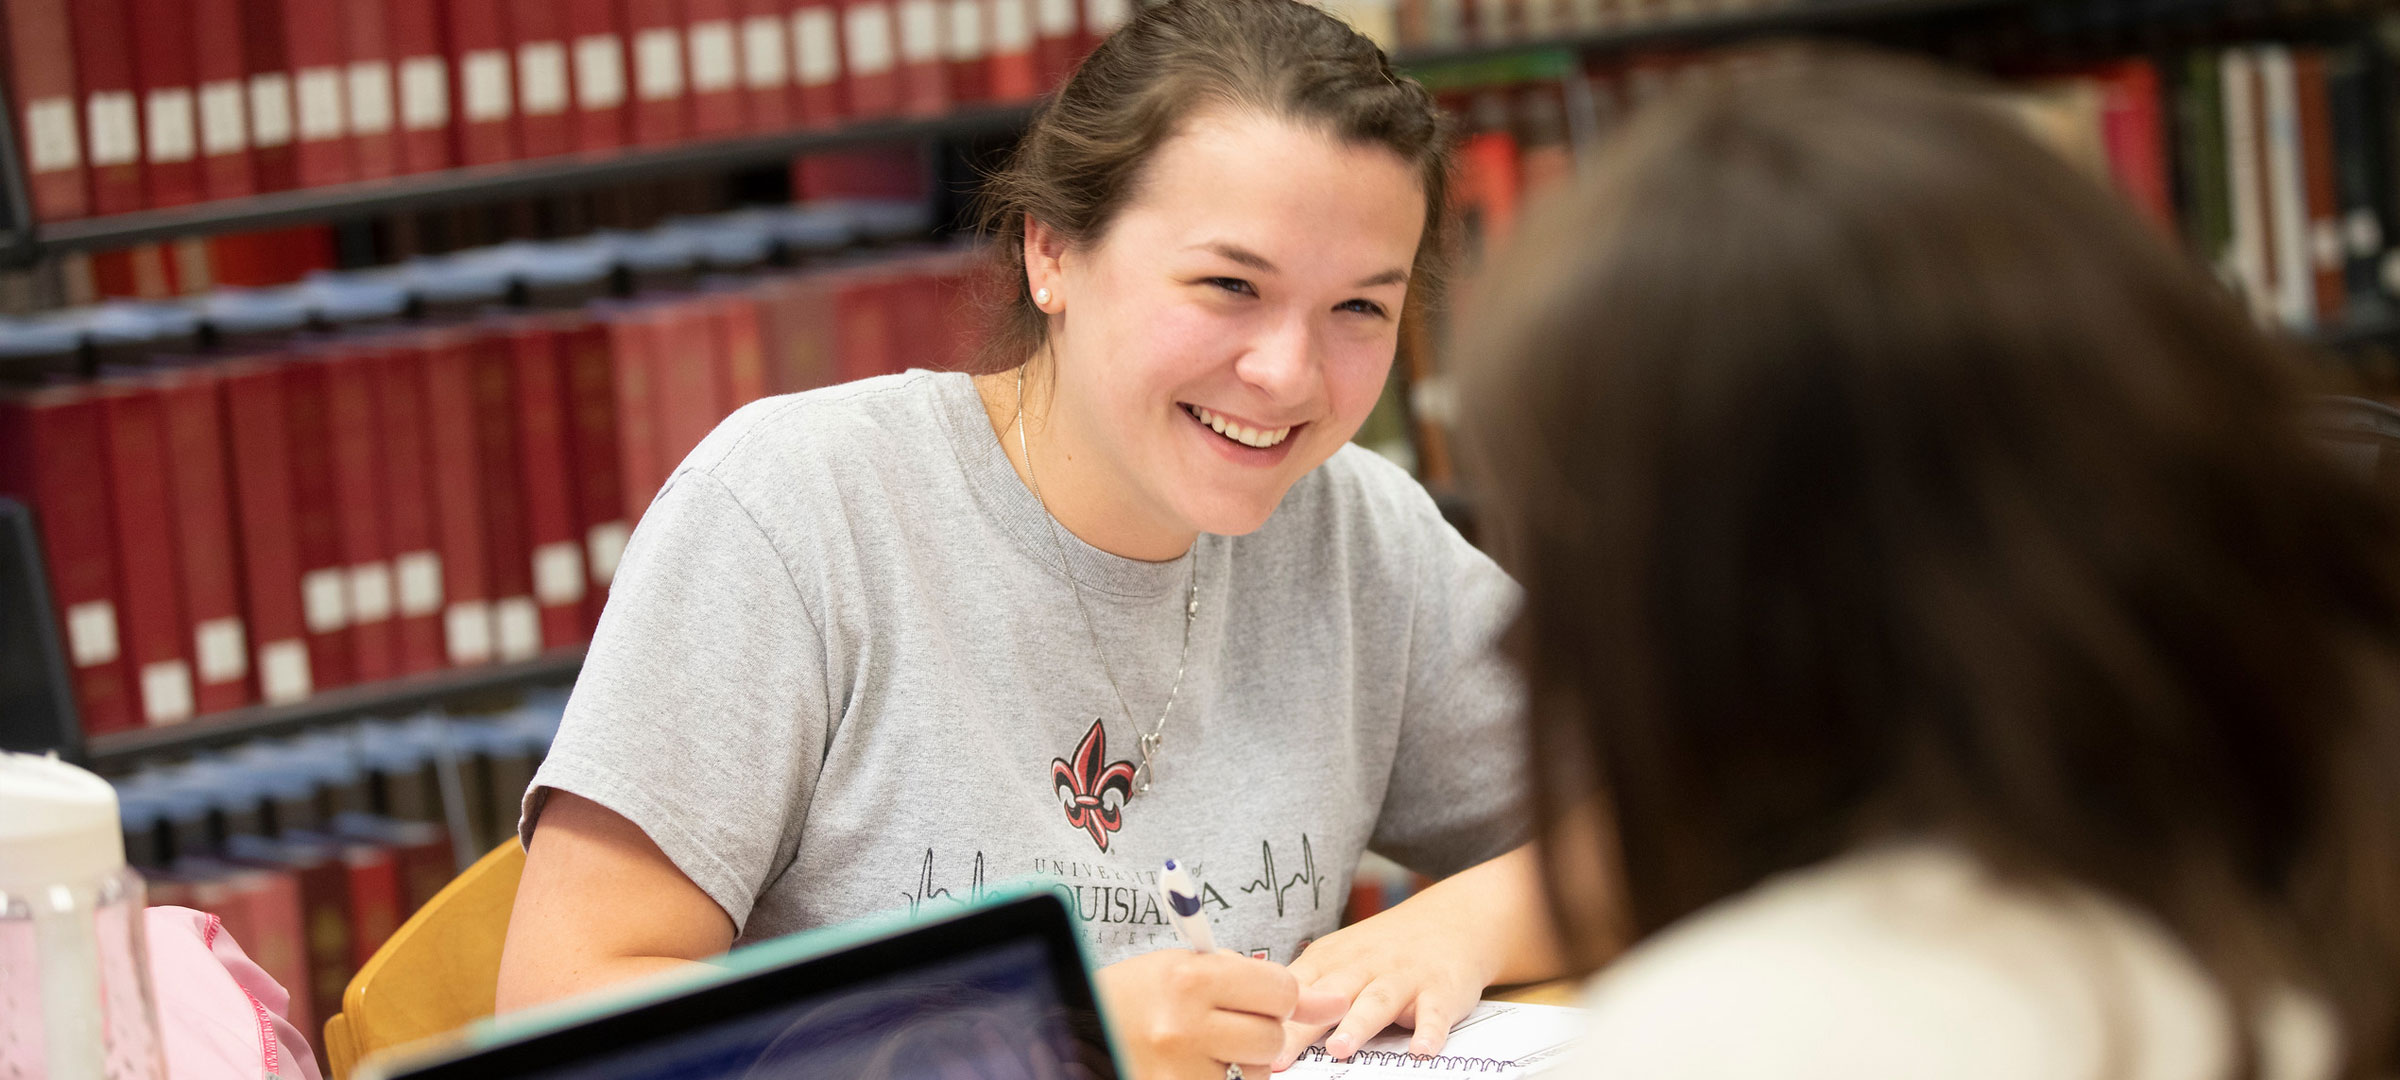 A Bryman College student smiling and laughing with a classmate while studying